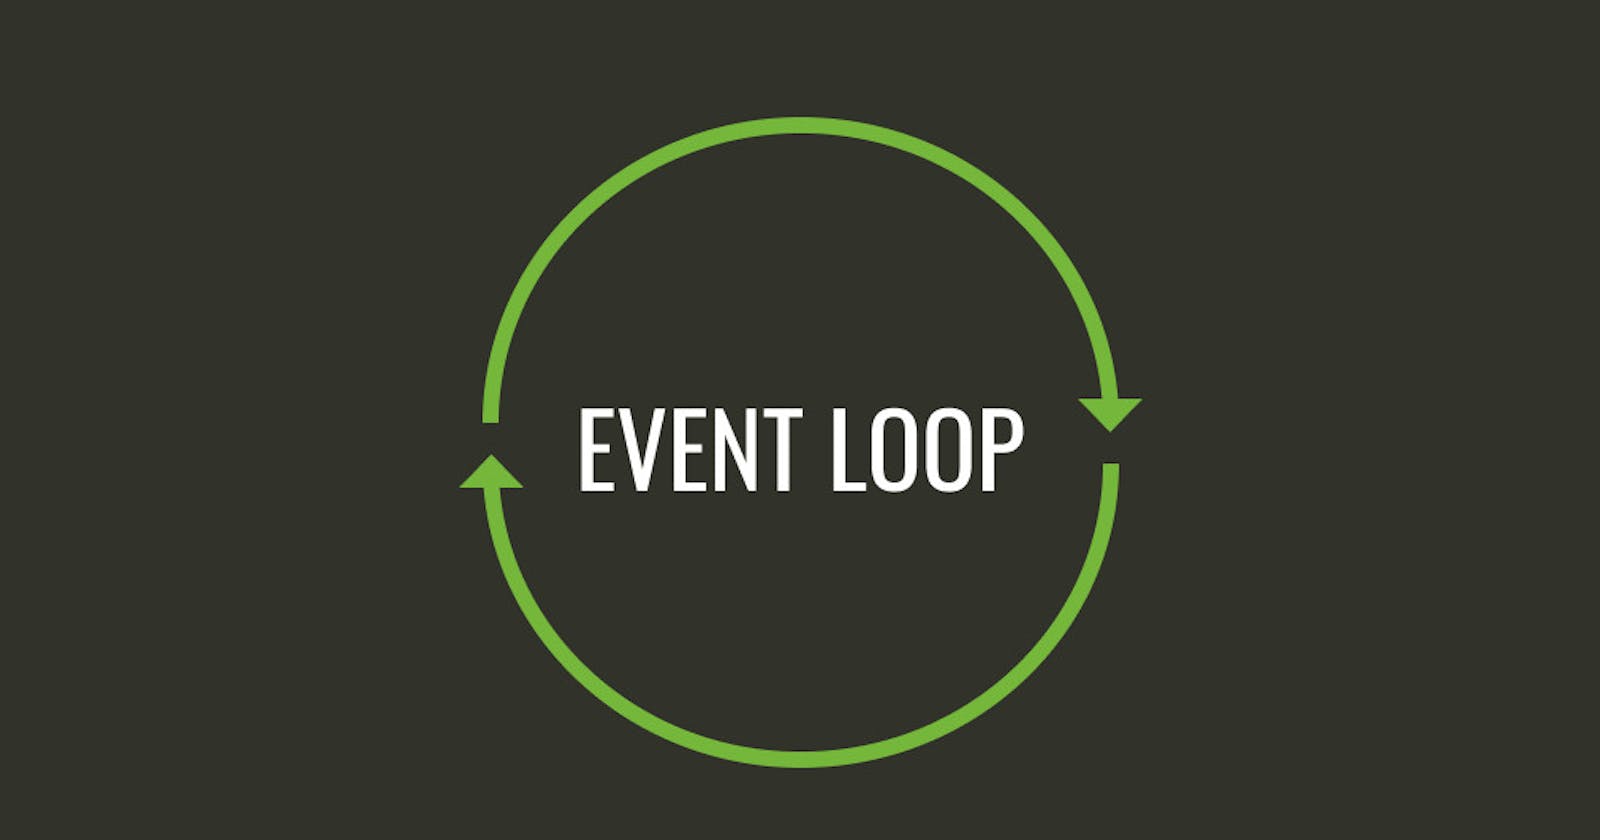 How does the Node Event loop work?